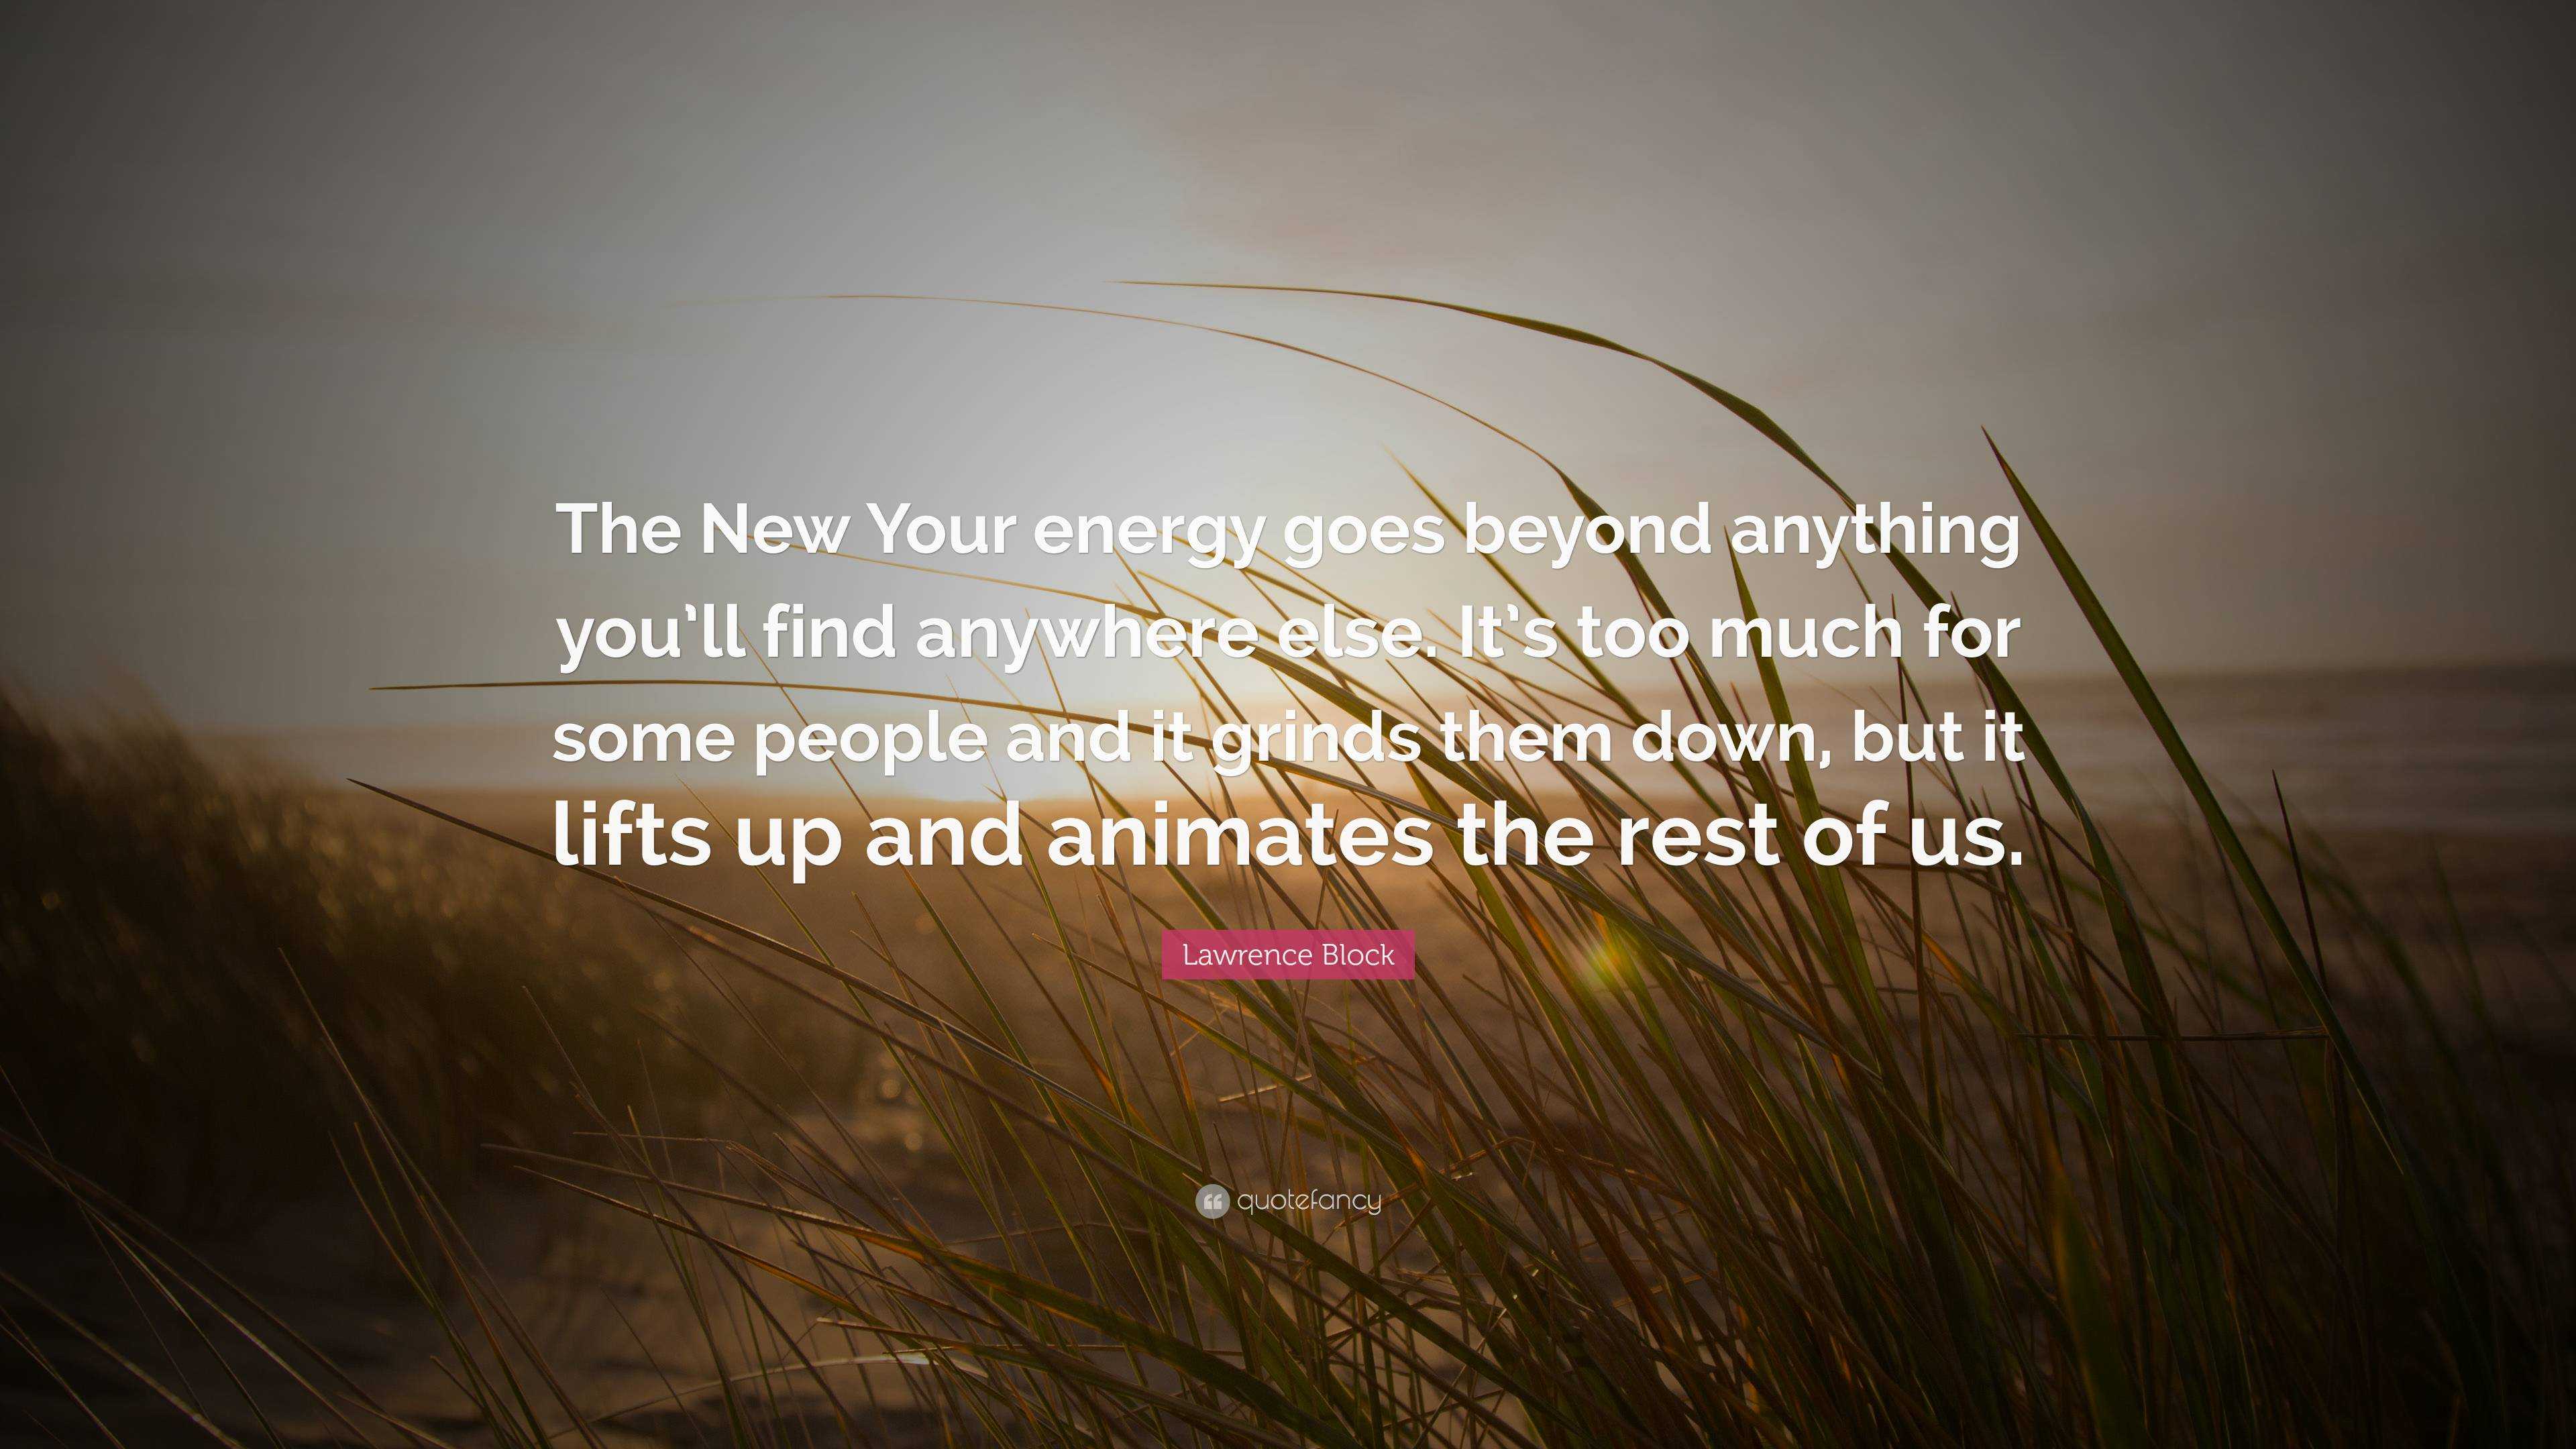 https://quotefancy.com/media/wallpaper/3840x2160/6612910-Lawrence-Block-Quote-The-New-Your-energy-goes-beyond-anything-you.jpg